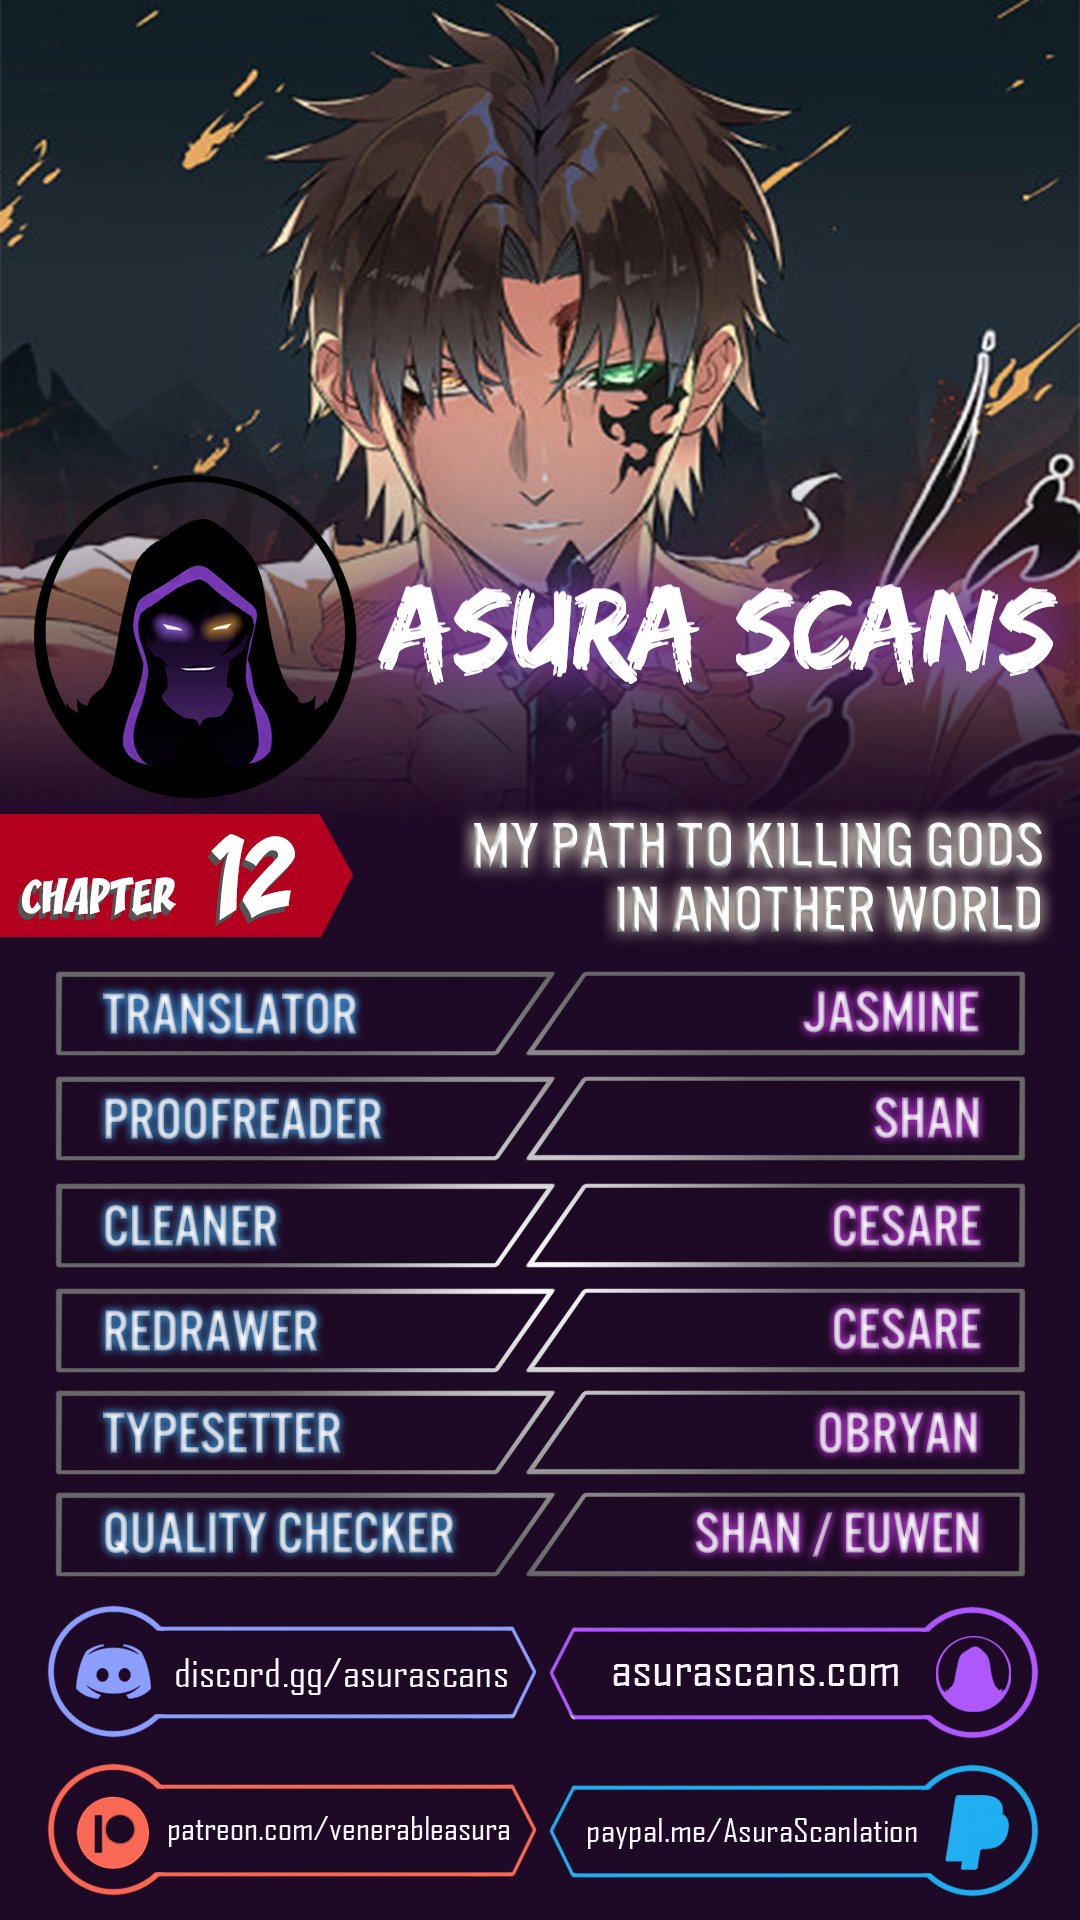 My Path to Killing Gods in Another World - Chapter 23163 - Image 1